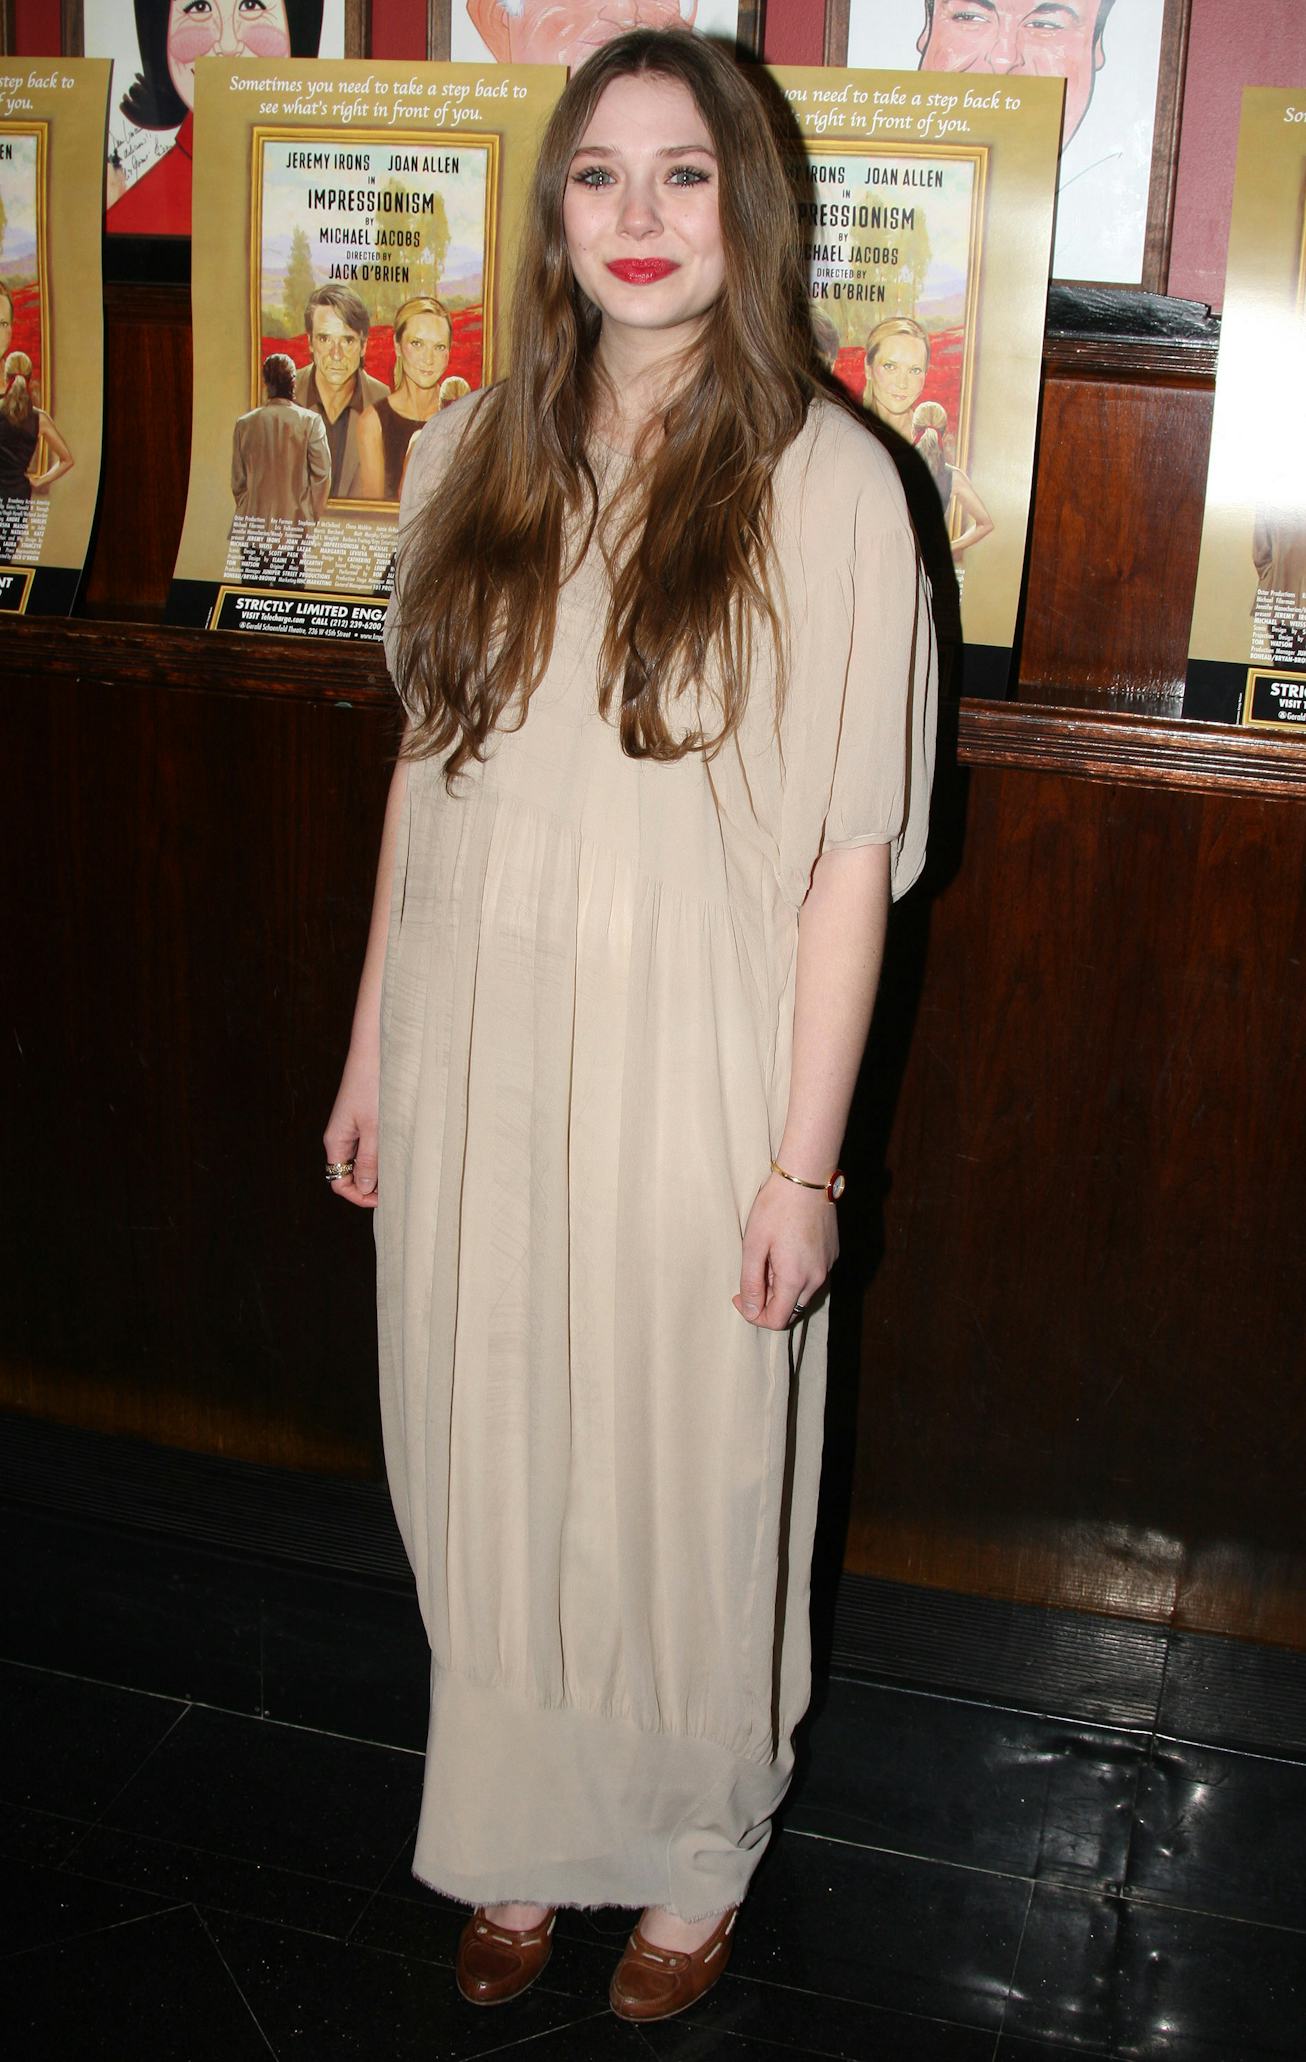 Elizabeth Olsen at the 2009 Impressionism Broadway Opening Night after-party